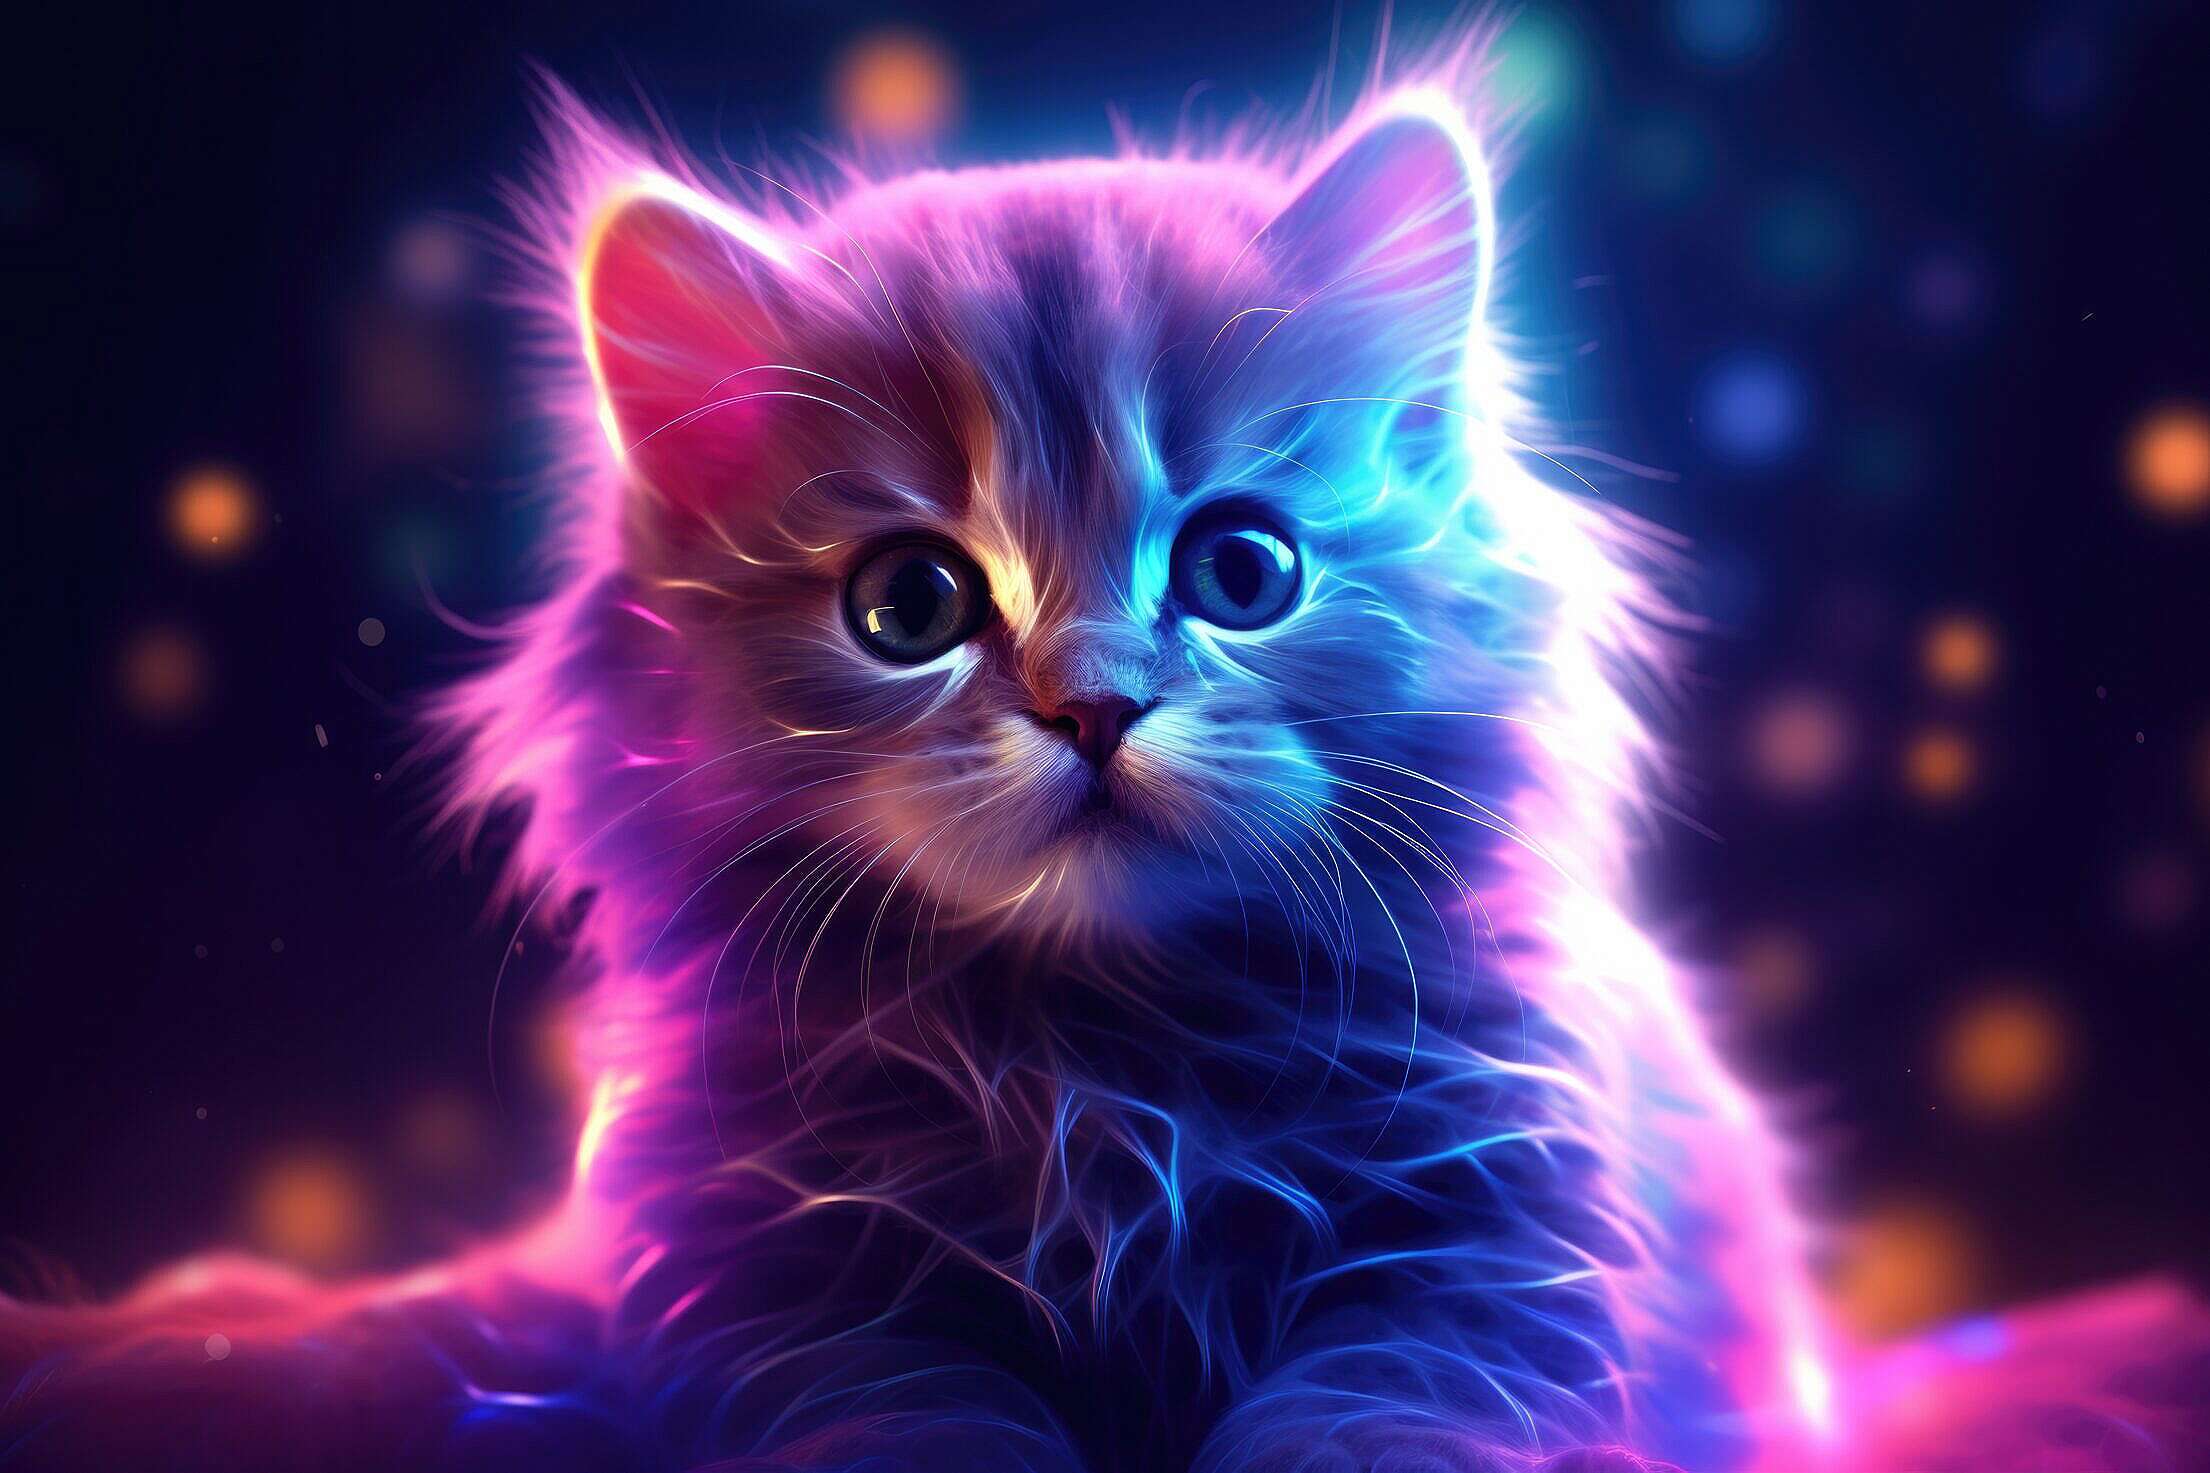 Neon wallpapers – neon animals – Apps on Google Play